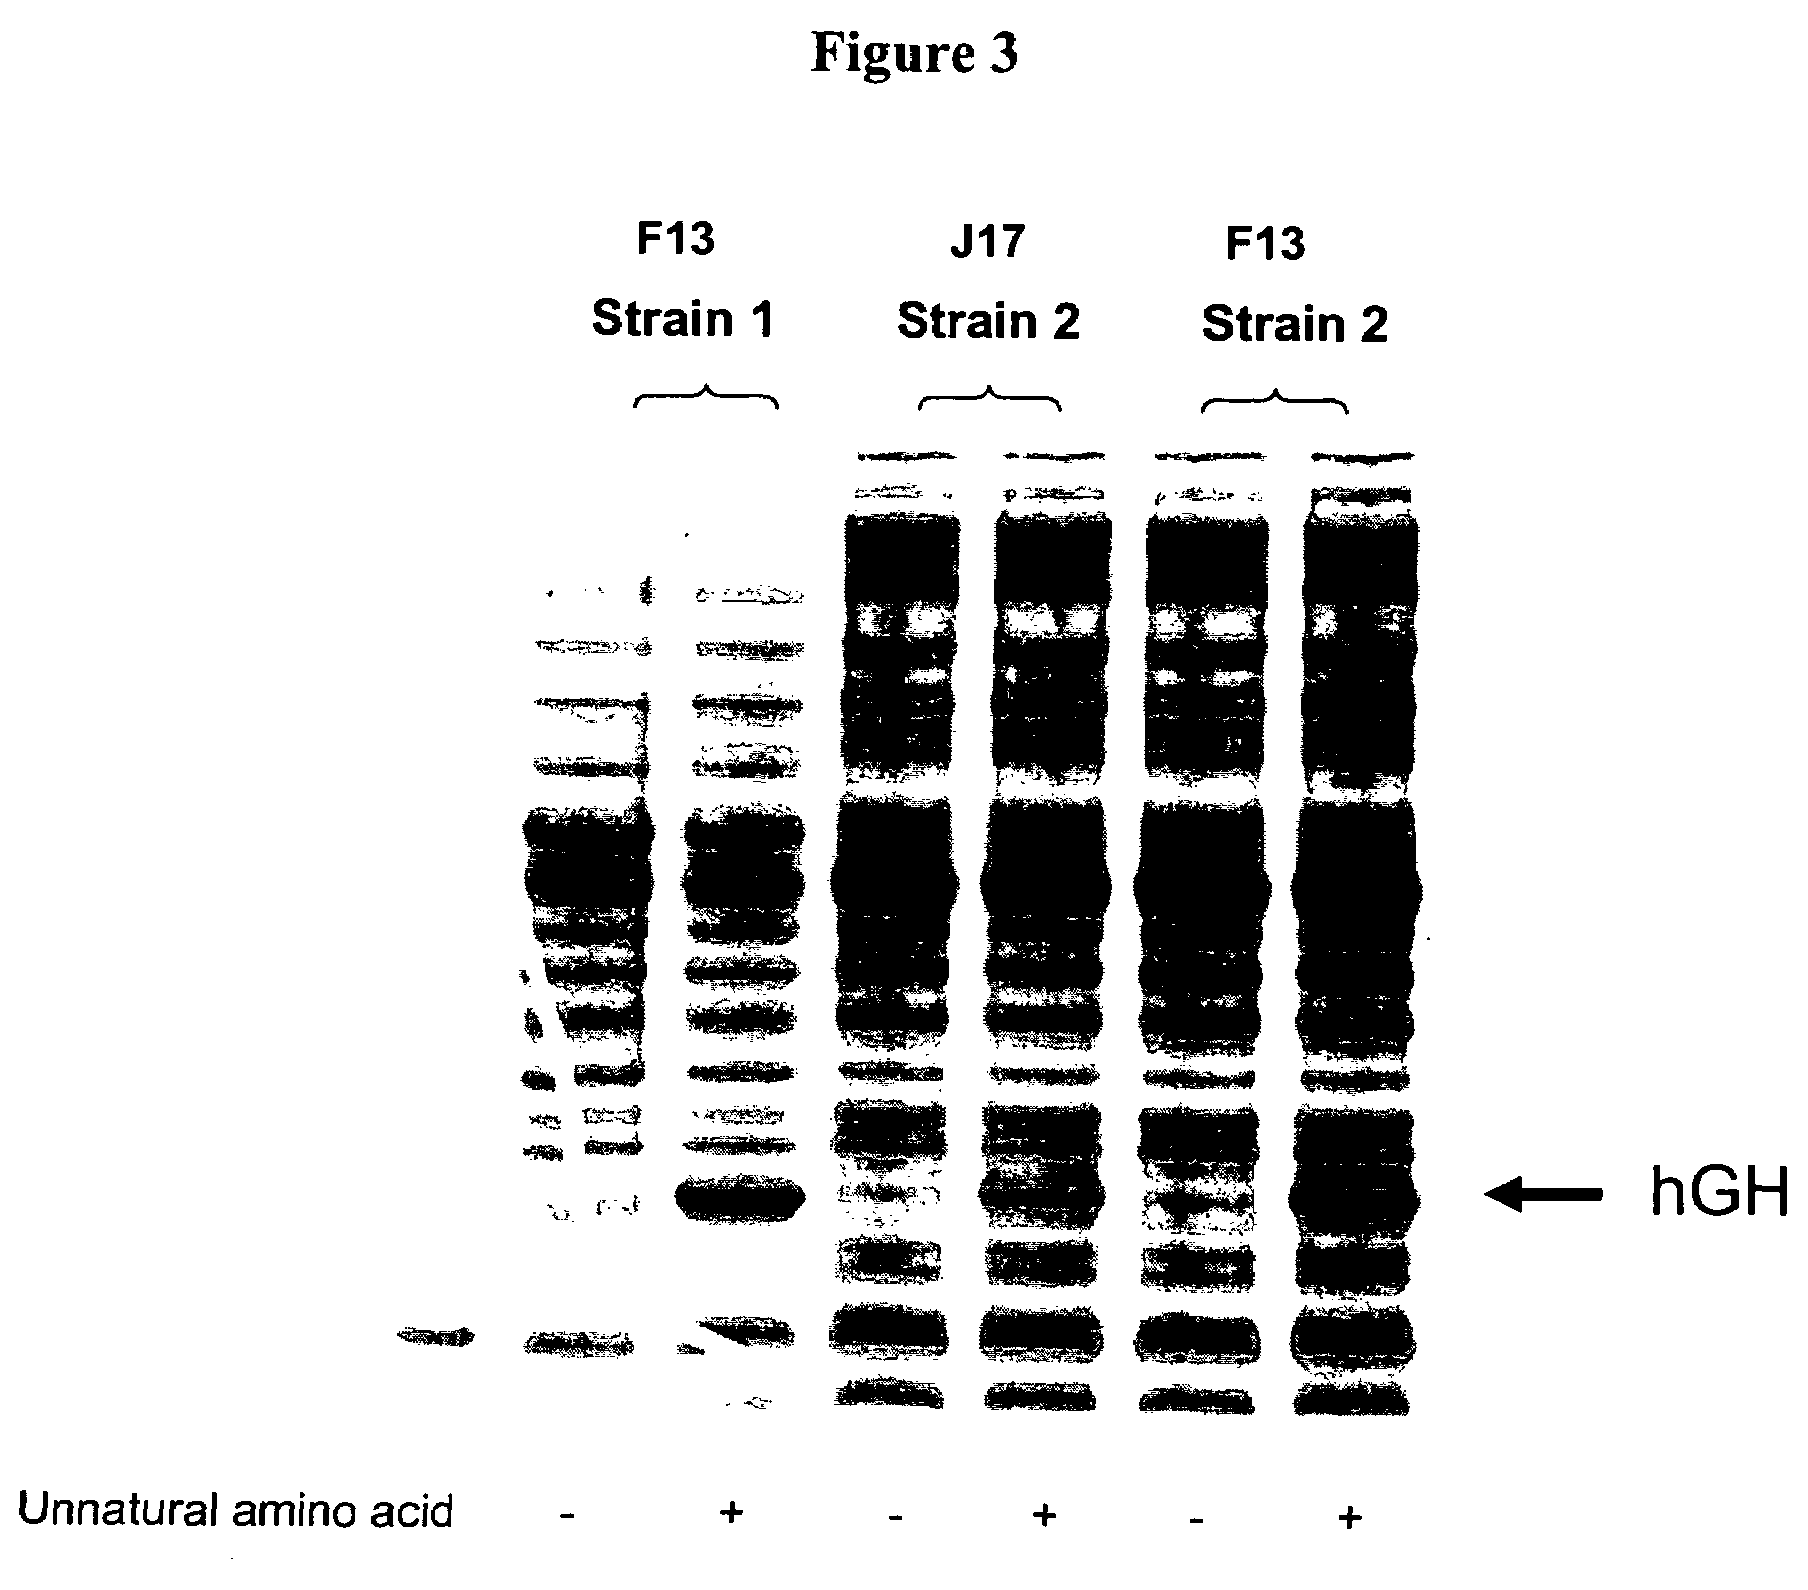 Compositions of tRNA and uses thereof